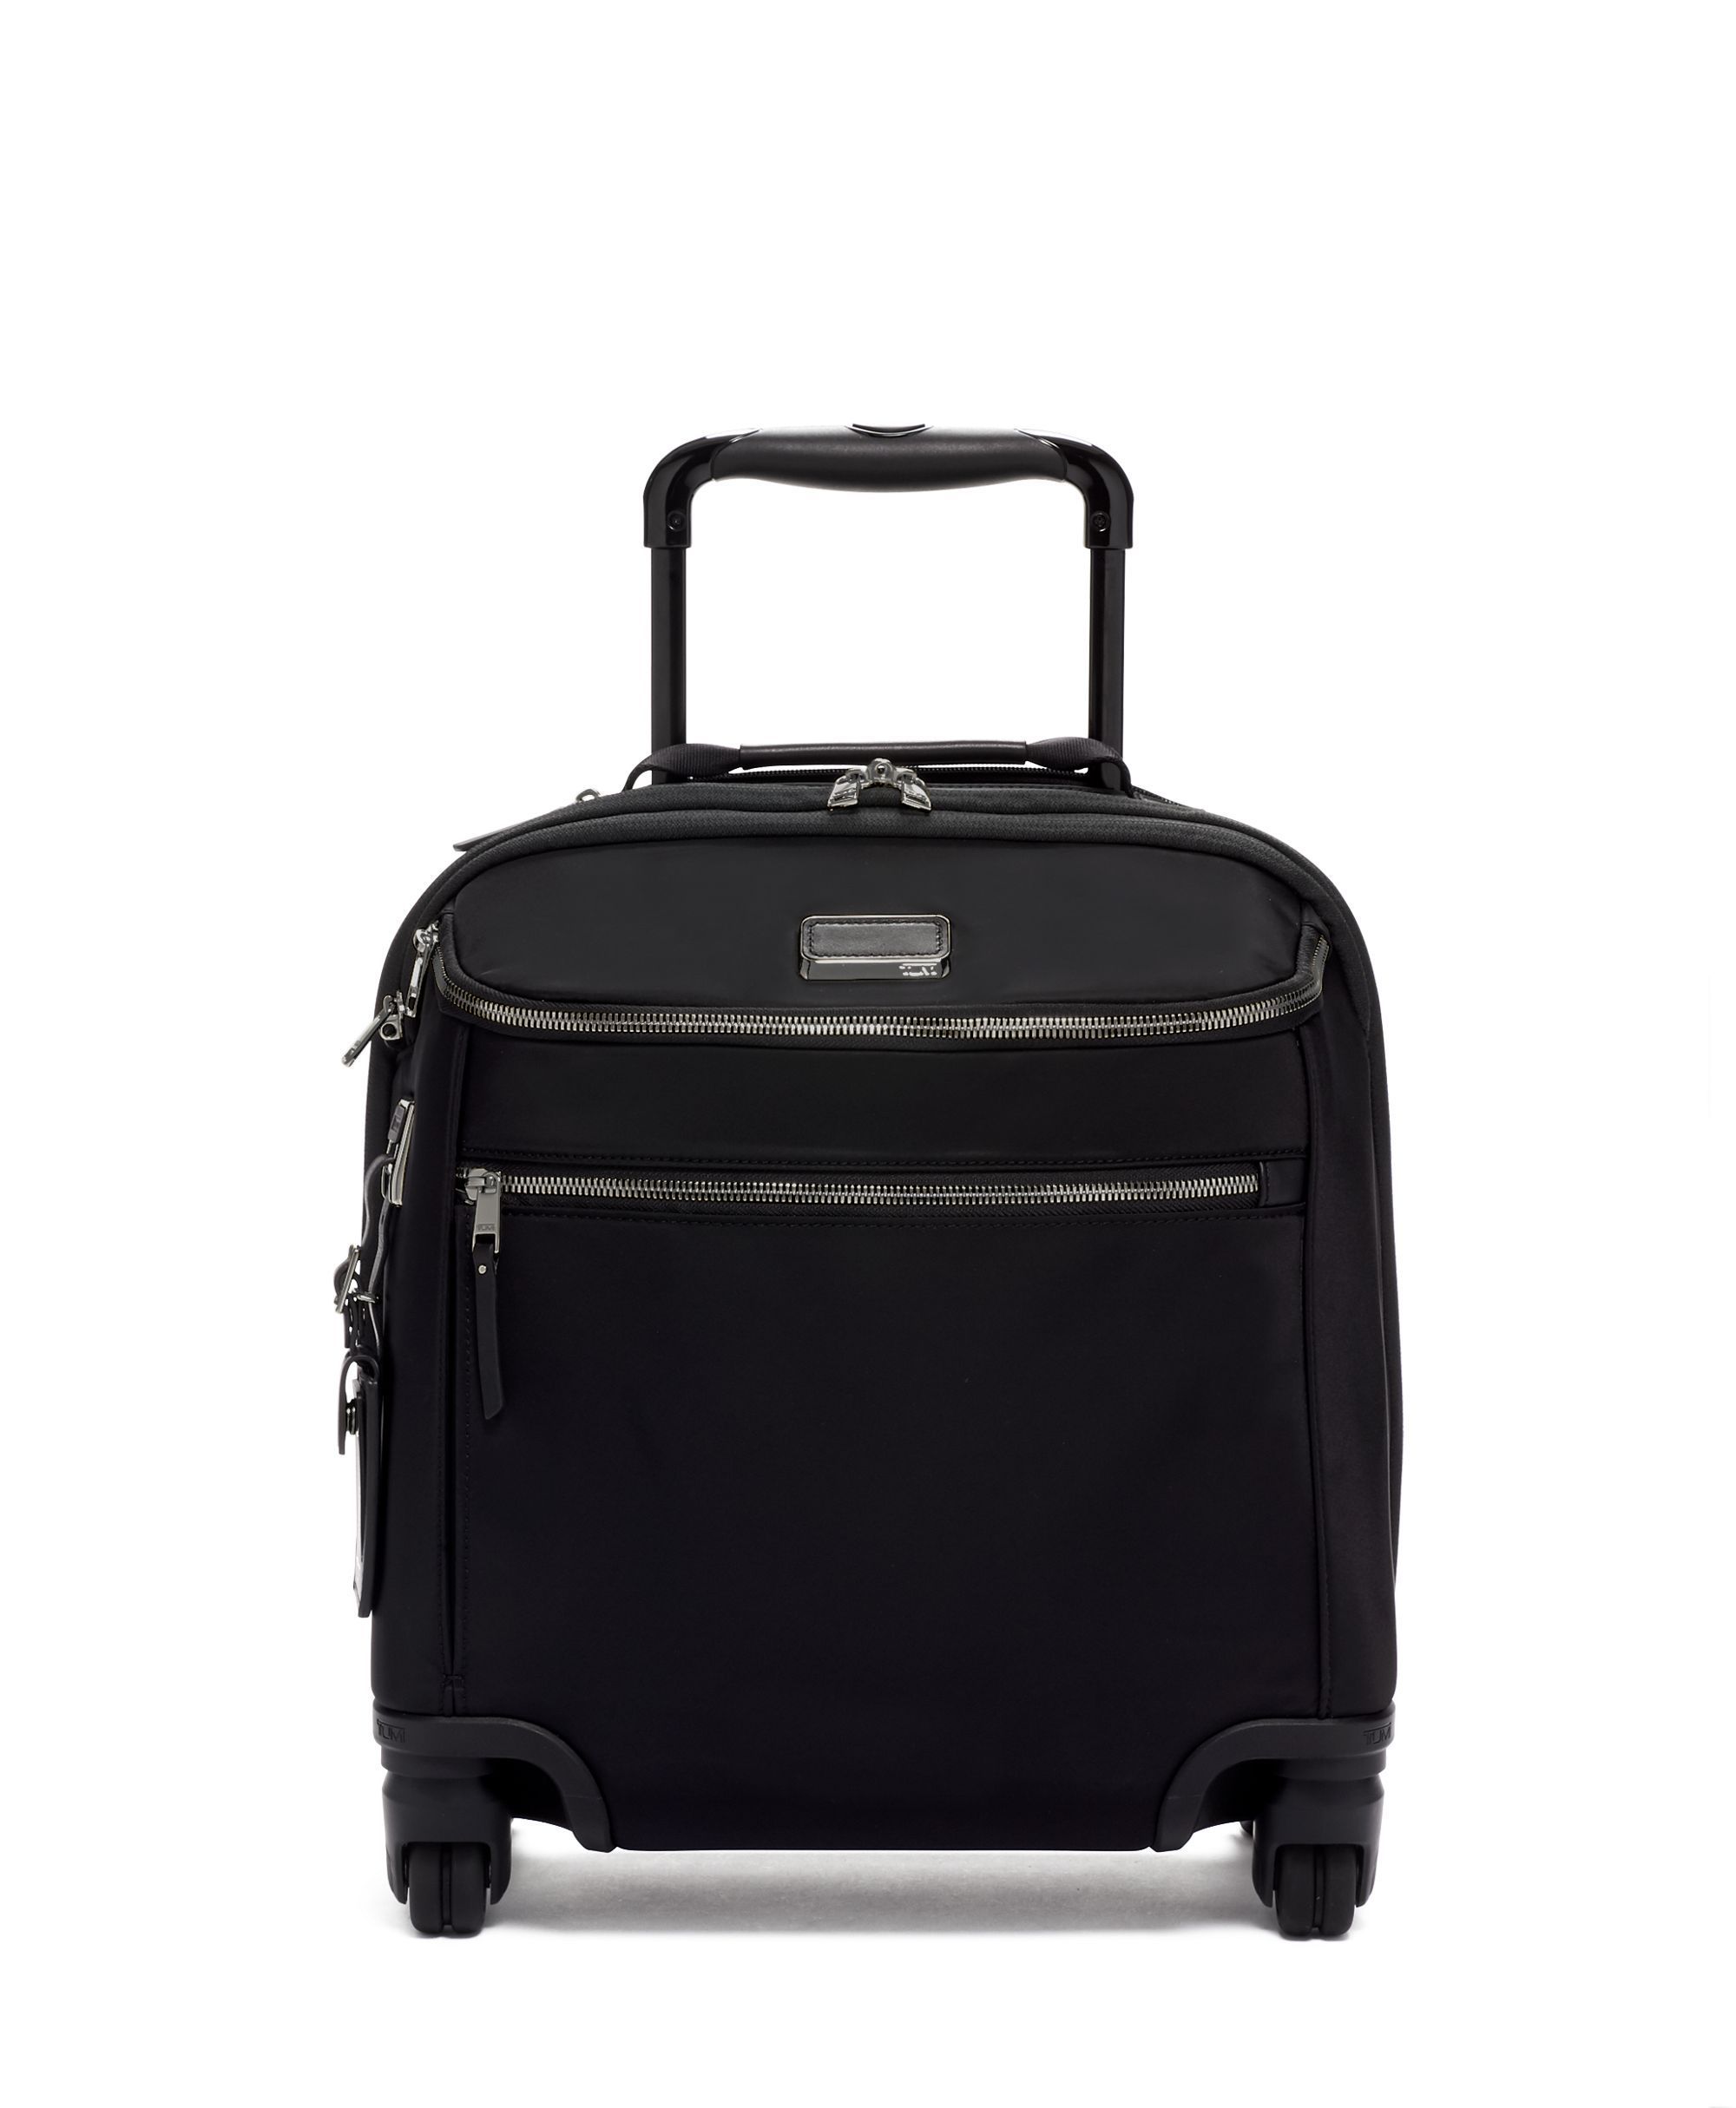 <p><strong>$650.00</strong></p><p><a href="https://go.redirectingat.com?id=74968X1553576&url=https%3A%2F%2Fwww.tumi.com%2Fp%2Foxford-compact-carry-on-0135491T522%2F&sref=https%3A%2F%2Fwww.esquire.com%2Flifestyle%2Fg60232227%2Fbest-underseat-luggage%2F">Shop Now</a></p><p>This high-tech, under-seat carry-on is your ultimate travel companion for short trips. It features a secure double-zip back compartment and a special padded slot for up to a 14" laptop. Stay powered up with the built-in USB port and a neatly organized front compartment for your cable. Easy to move around with a telescoping handle, four recessed wheels, and a comfortable leather-wrapped handle for lifting.</p><p>It's not just about moving, either. It's about keeping everything in place while you do. Inside, find media pockets, a zip pocket for your power bank, and spaces for cards and pens, all wrapped up in lightweight nylon. The front U-zip gives you easy access to the main compartment, ensuring that this carry-on is high-tech and highly functional, fitting perfectly under your seat.</p>